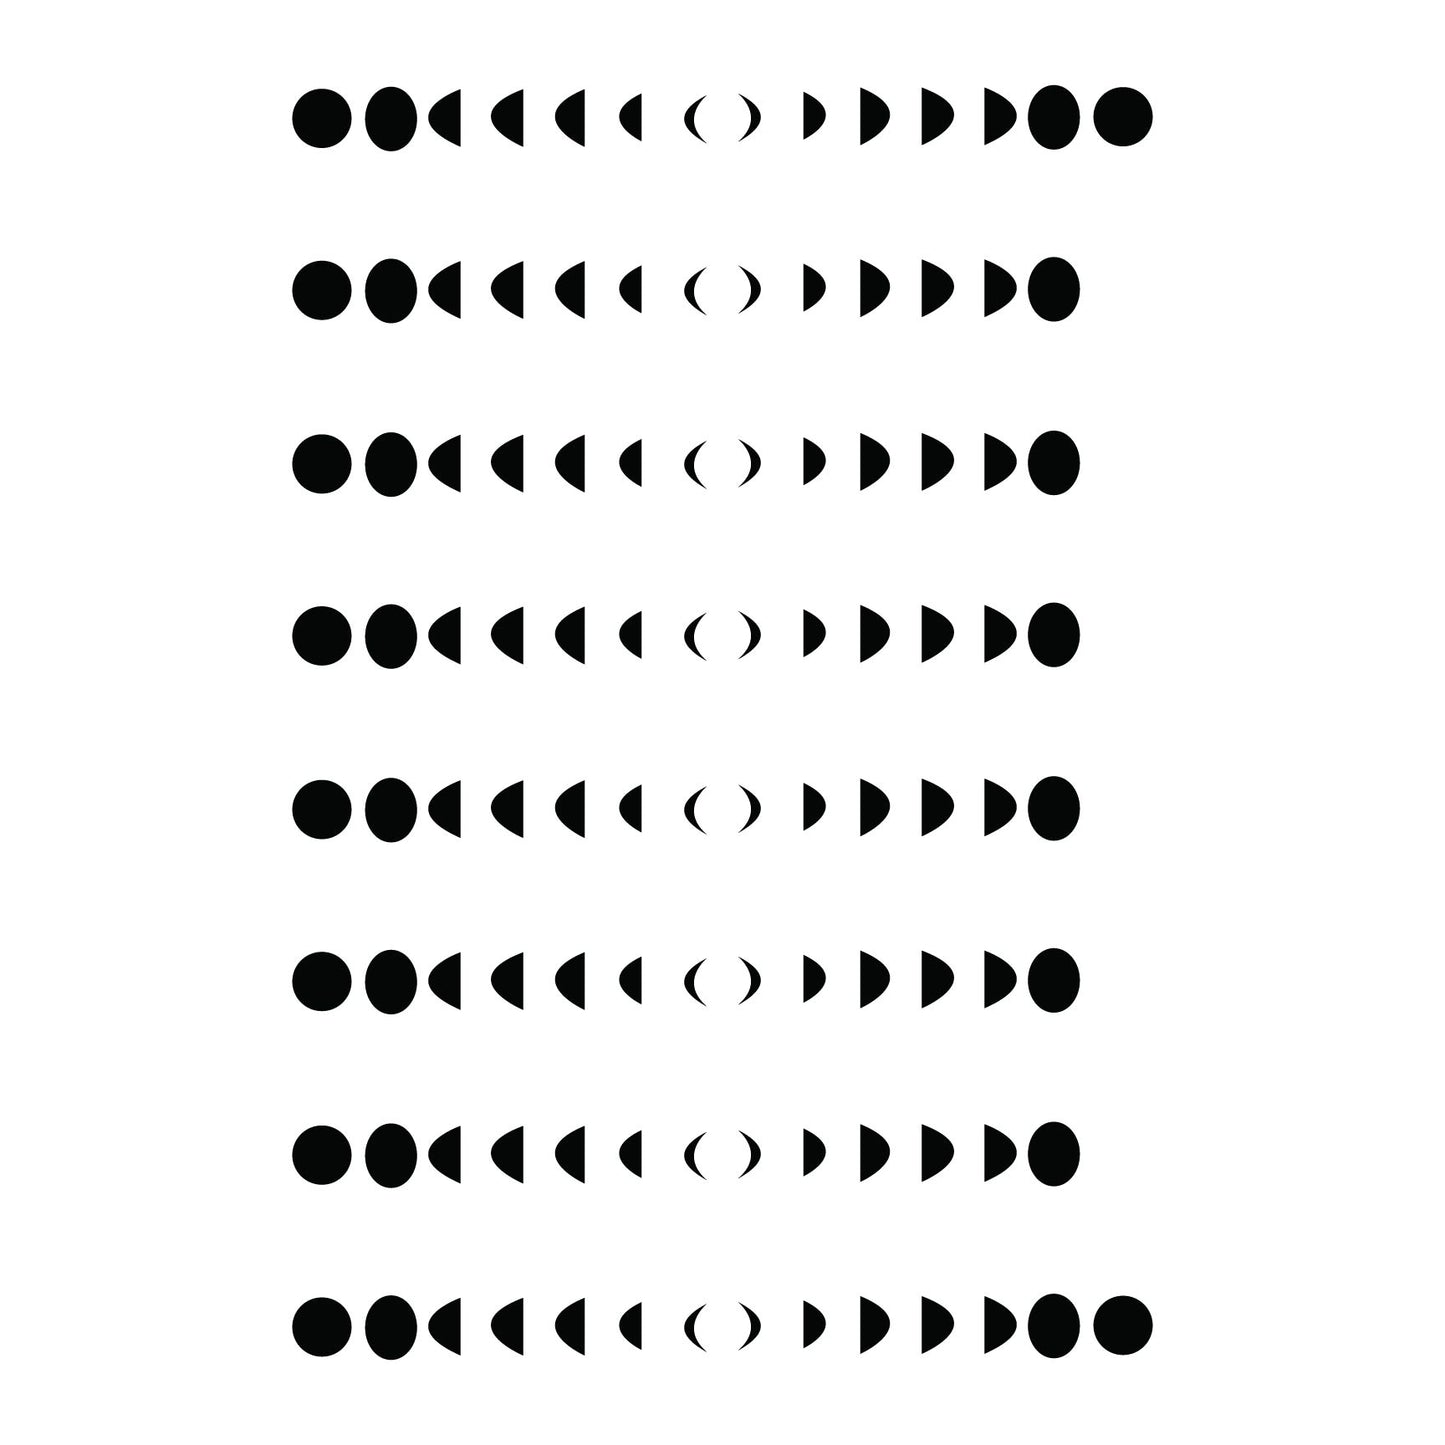 Oreo Moon Phases Design Stencil for Wall Painting (KDMD1457)